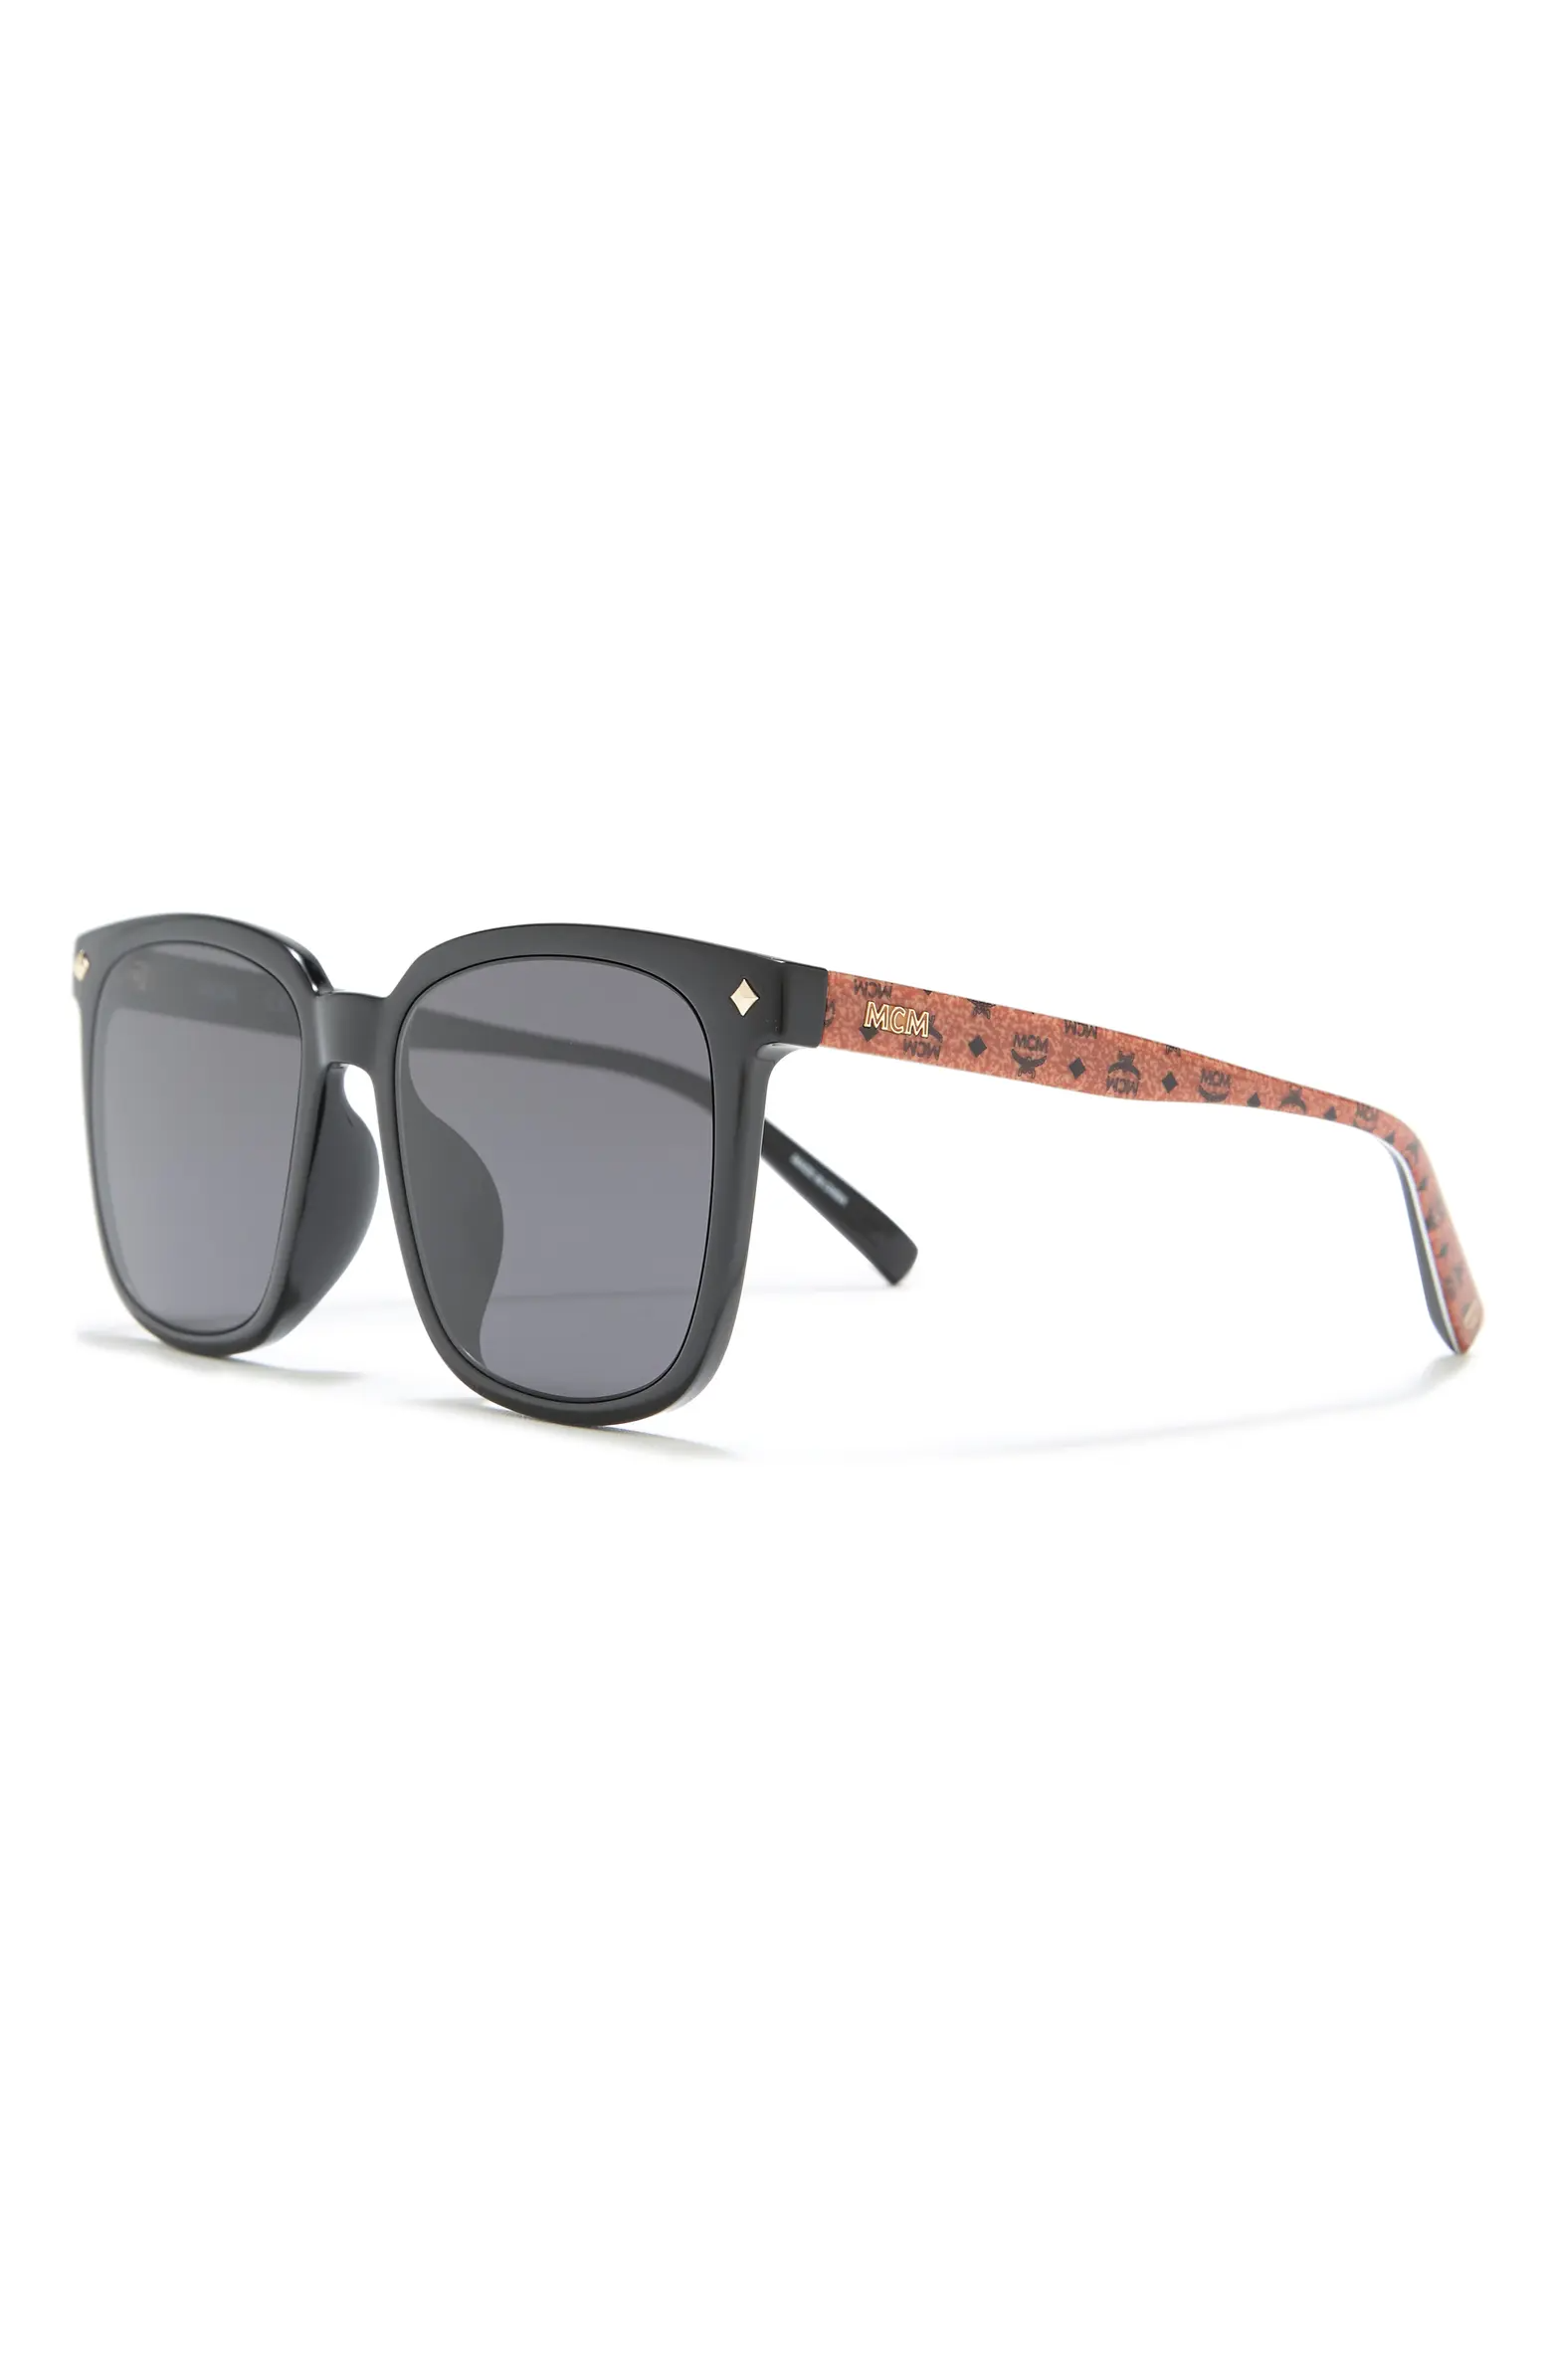 70% OFF the MCM 54mm Square Oversized Sunglasses — Sneaker Shouts